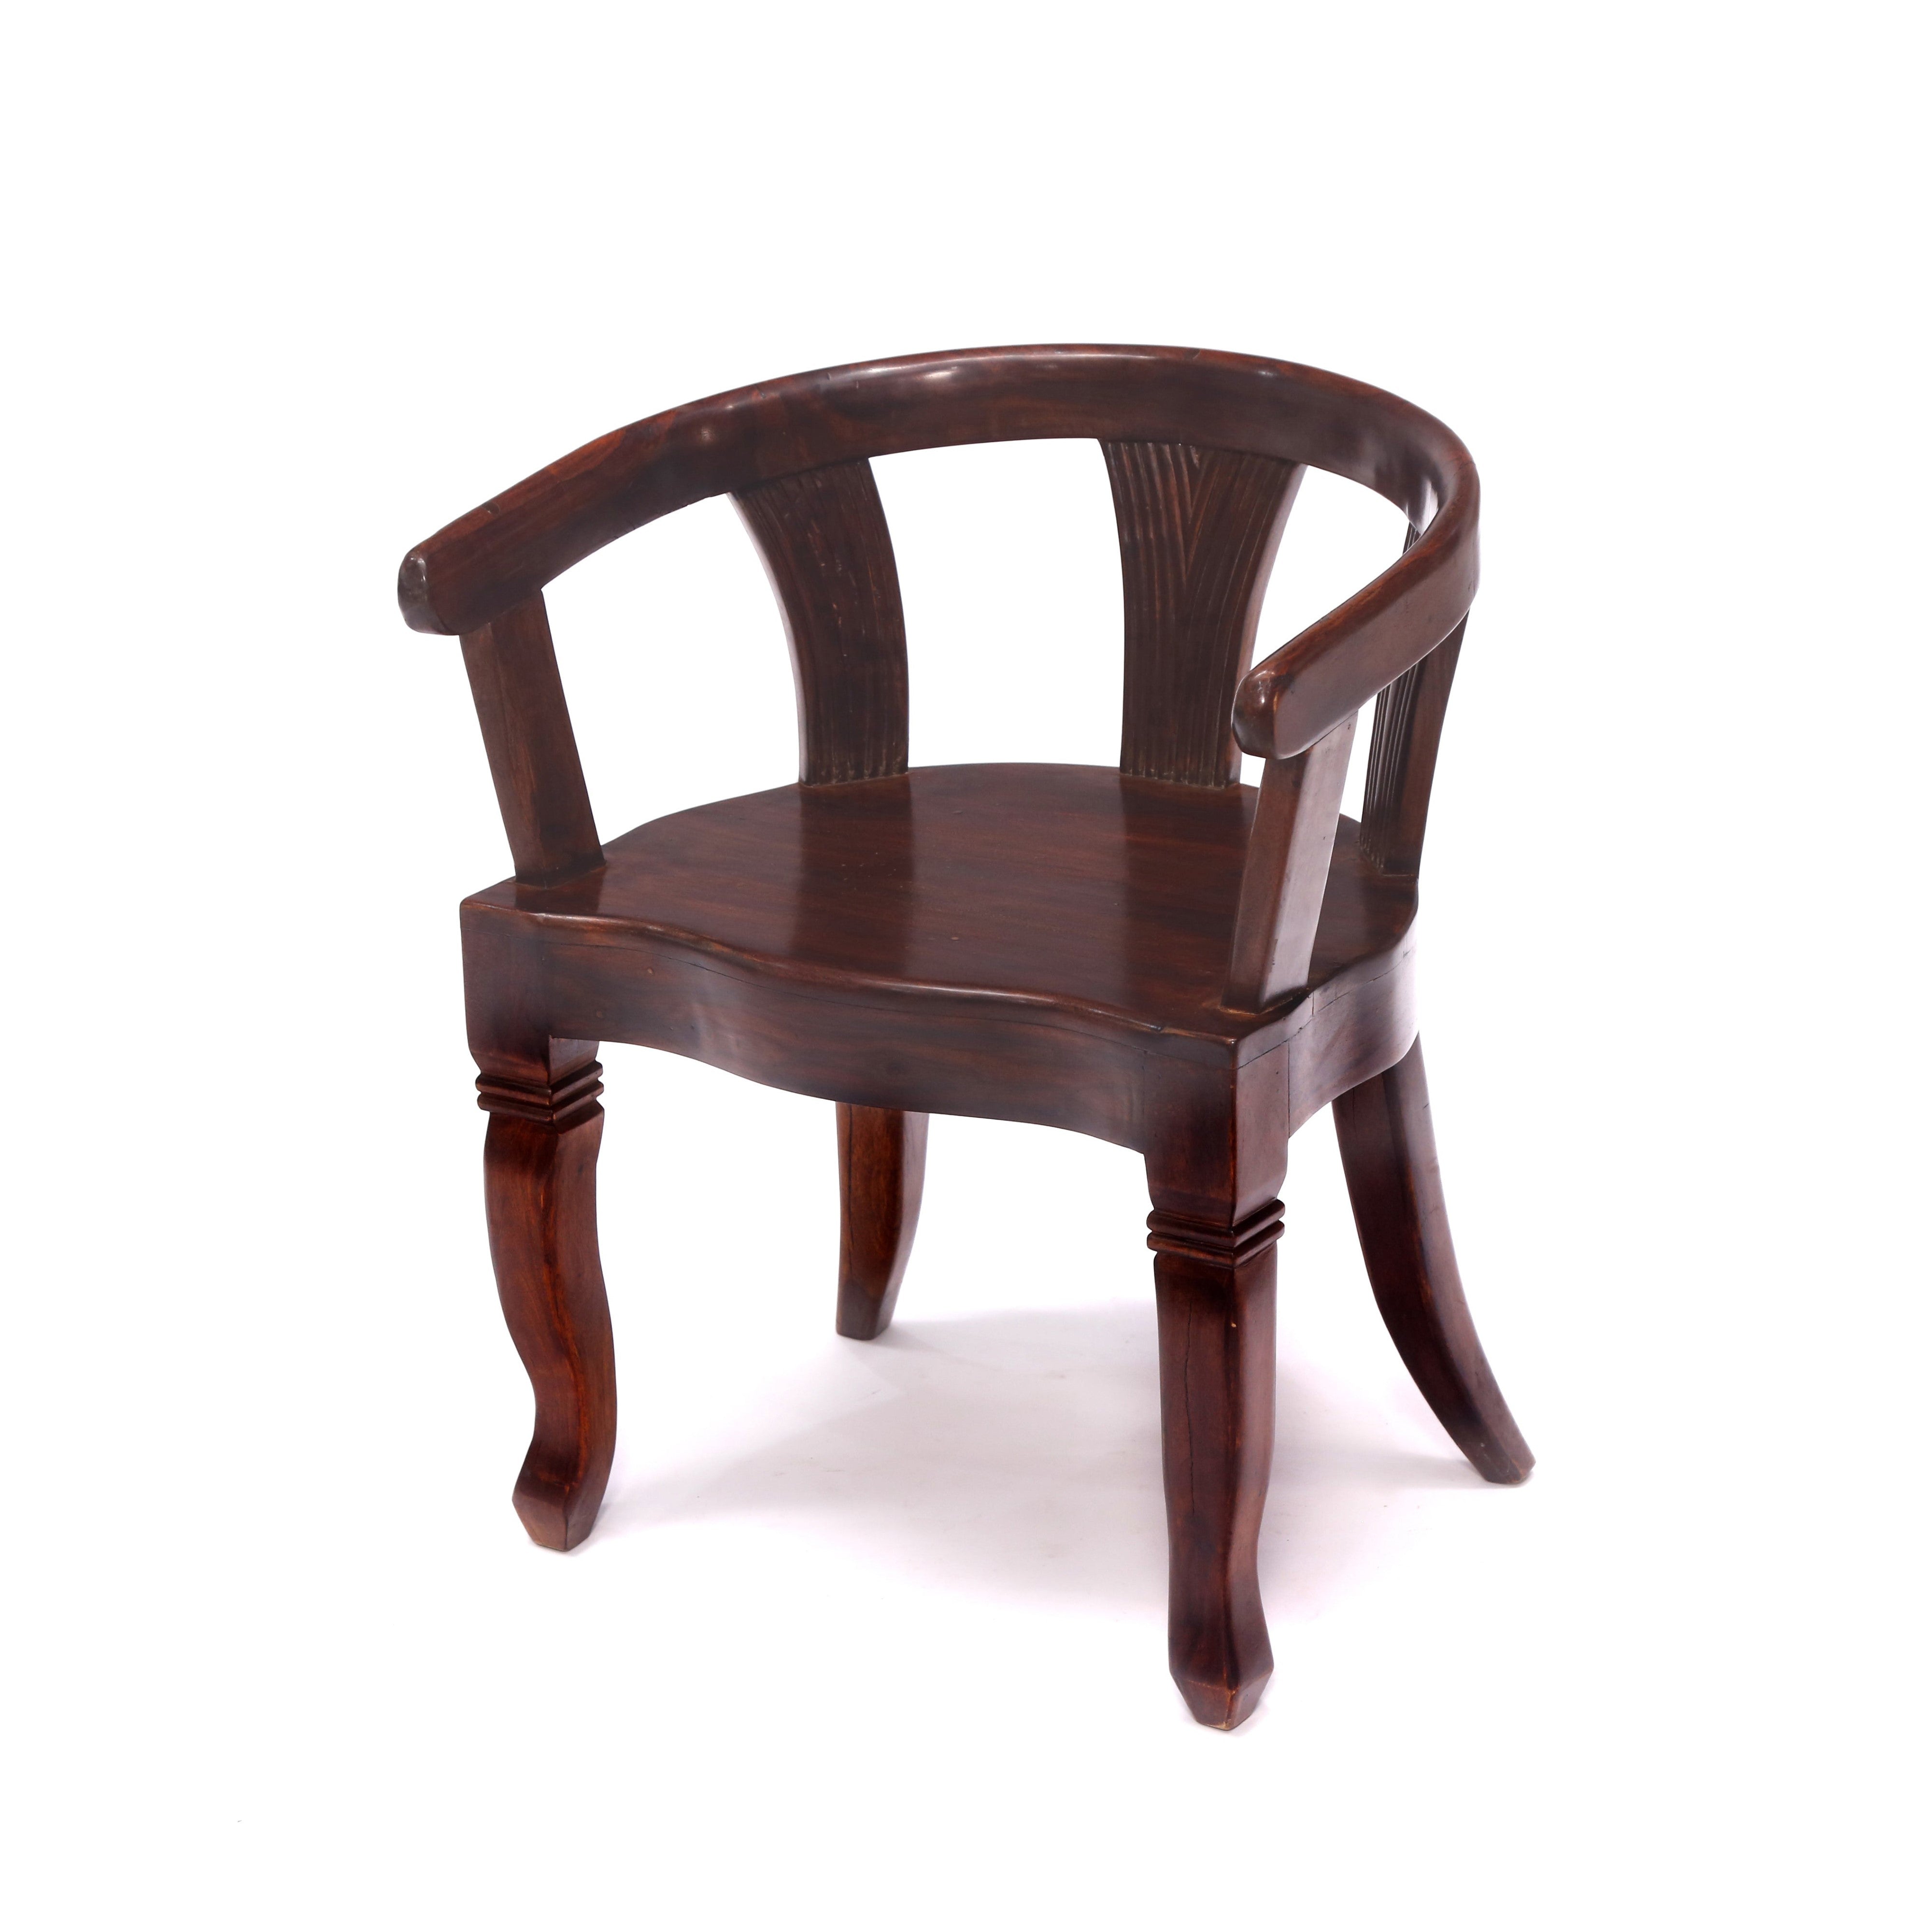 Solid Teak Dark Tone Rounded Arms Wooden Chair Arm Chair